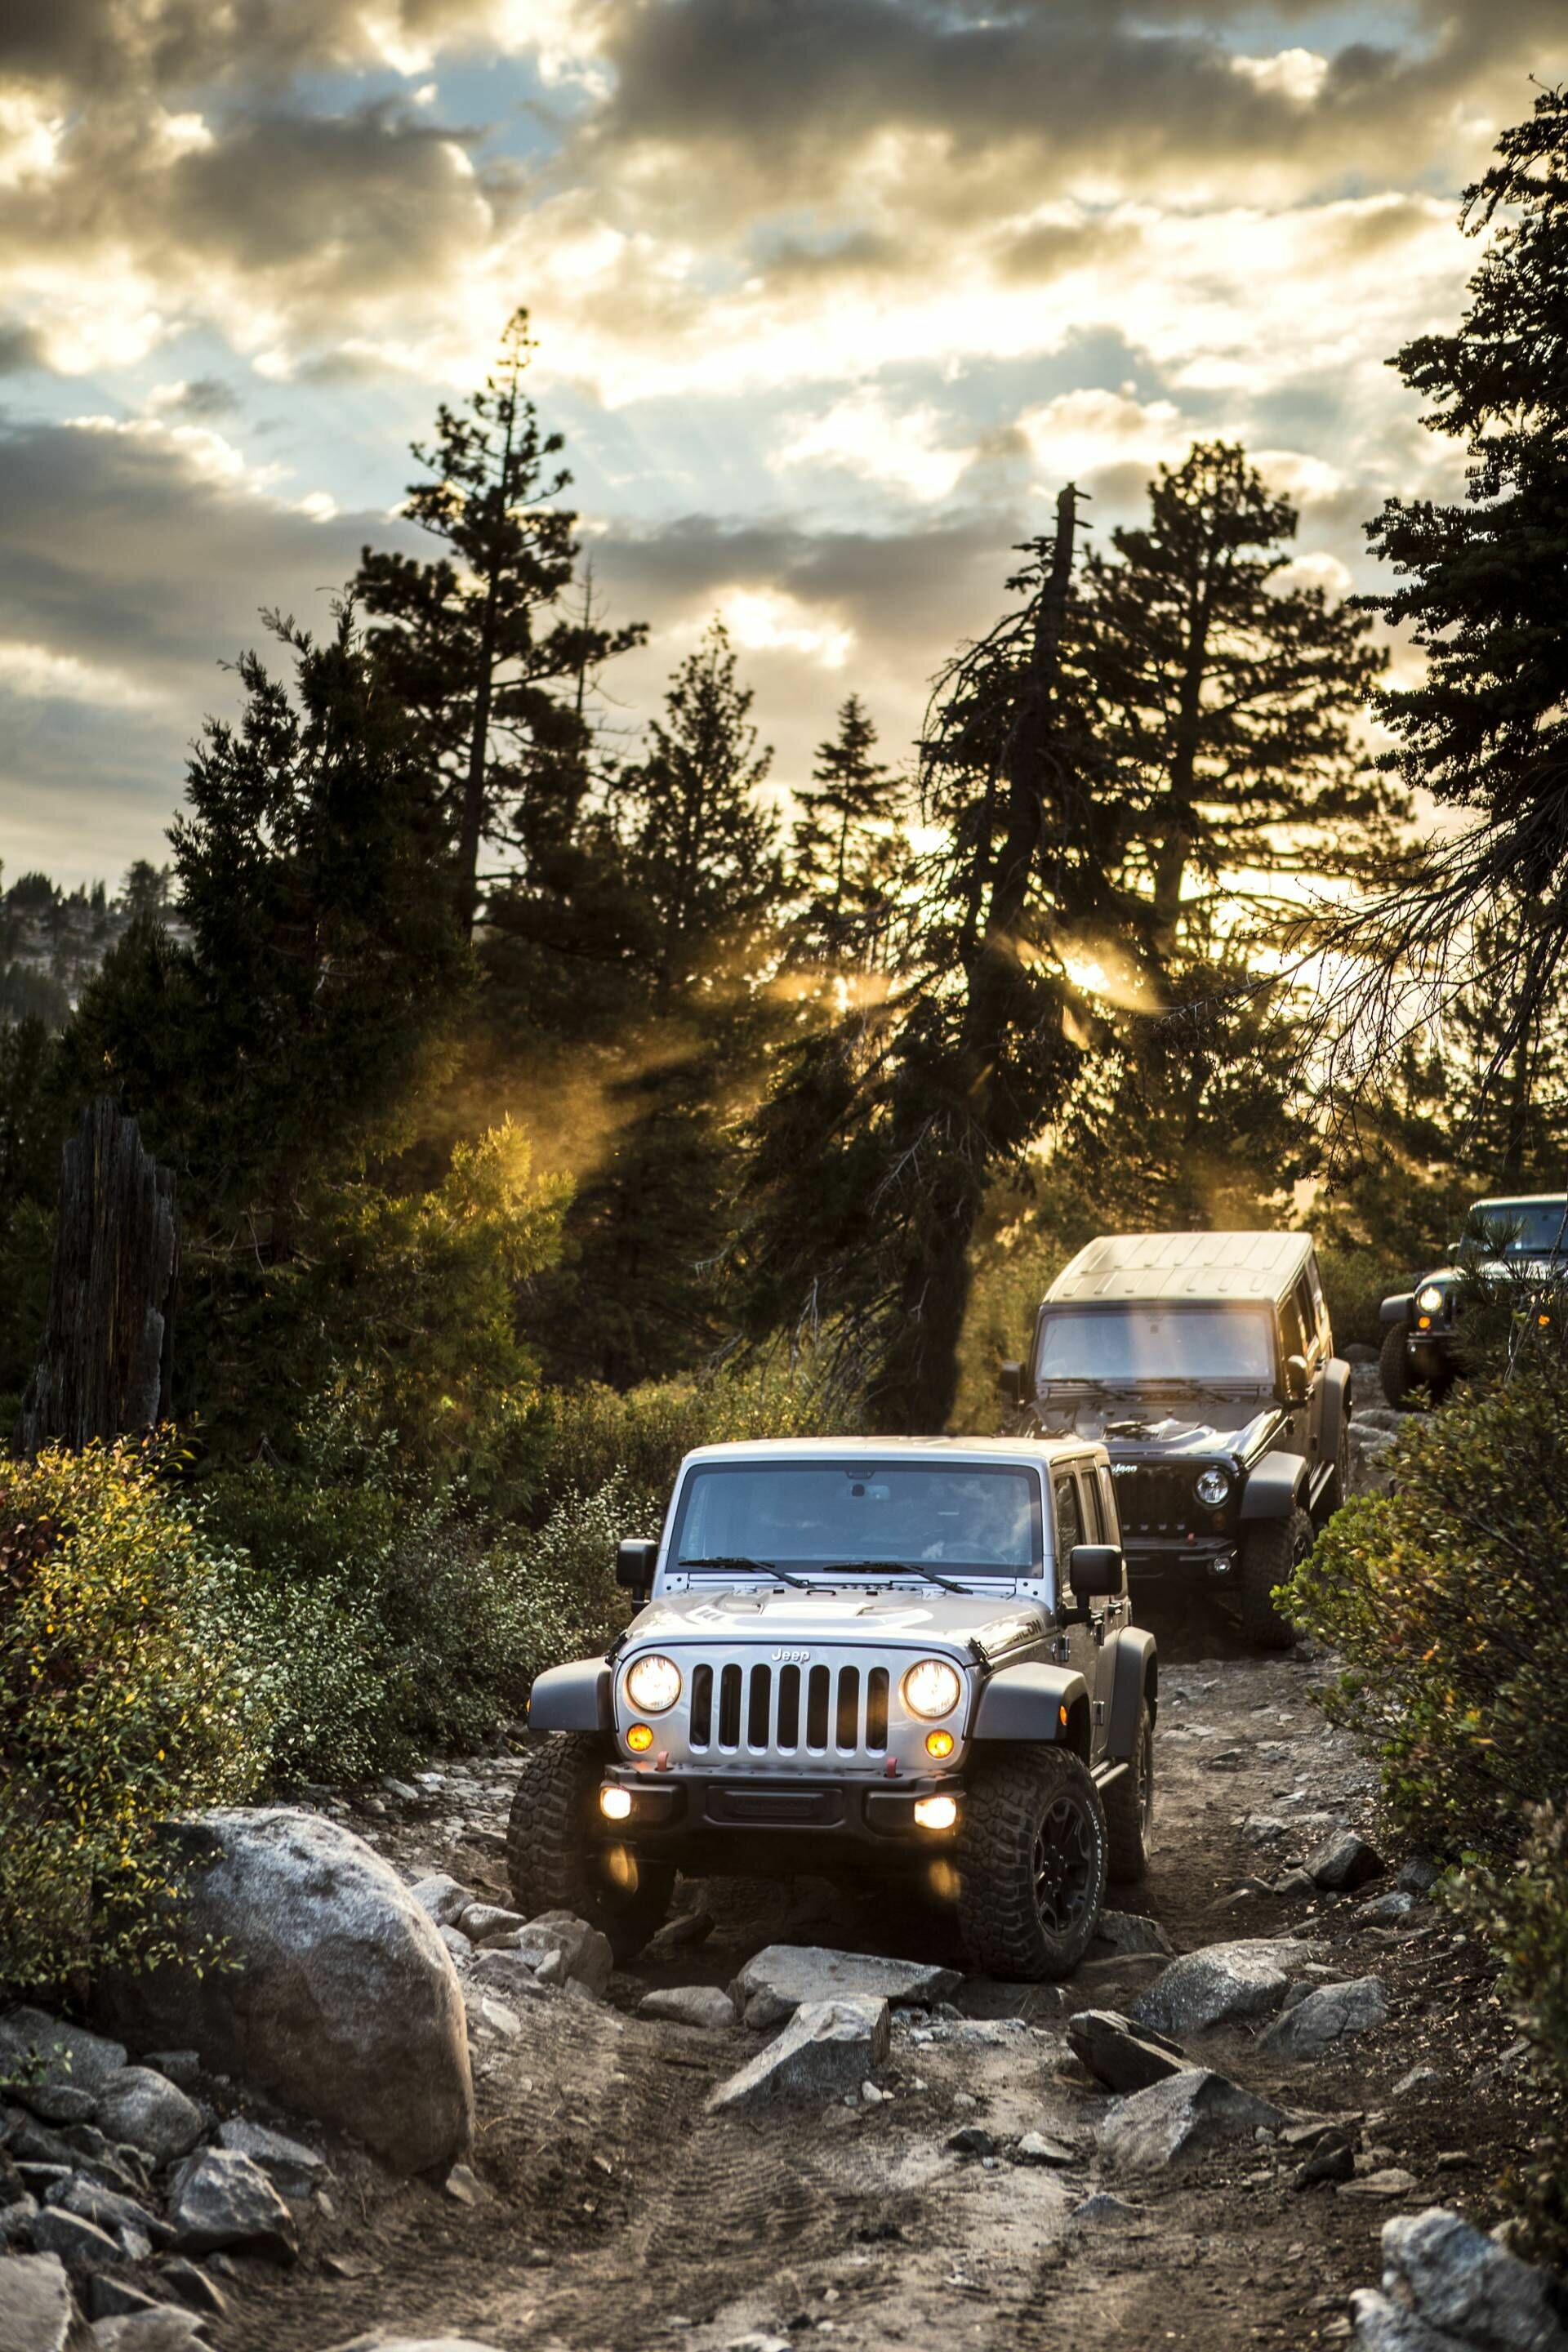 Jeep Wrangler: Trails, Rubicon, Outwardly strongly resembling the CJ-7 model. 1920x2880 HD Wallpaper.